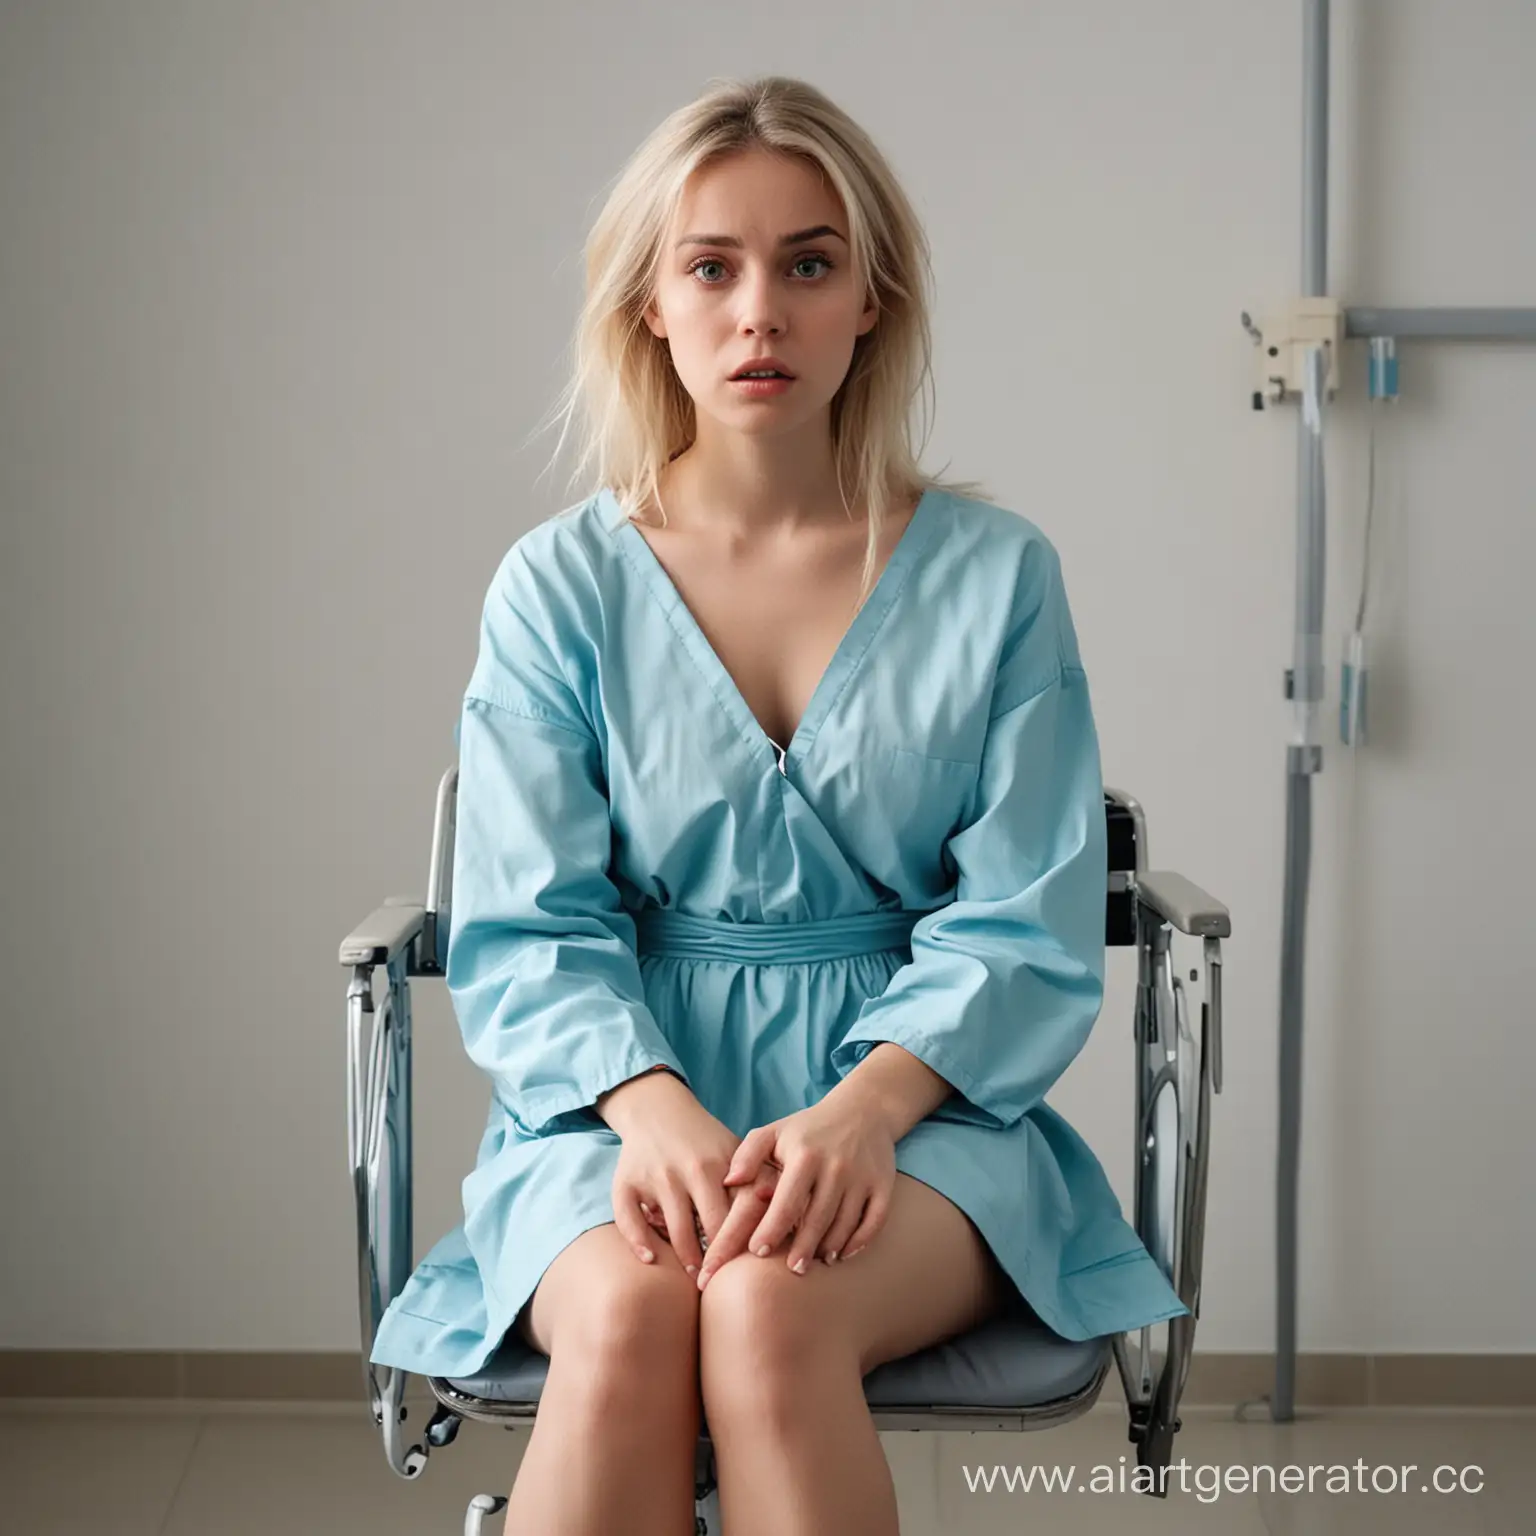 Frightened-Blonde-Girl-Tied-to-Medical-Chair